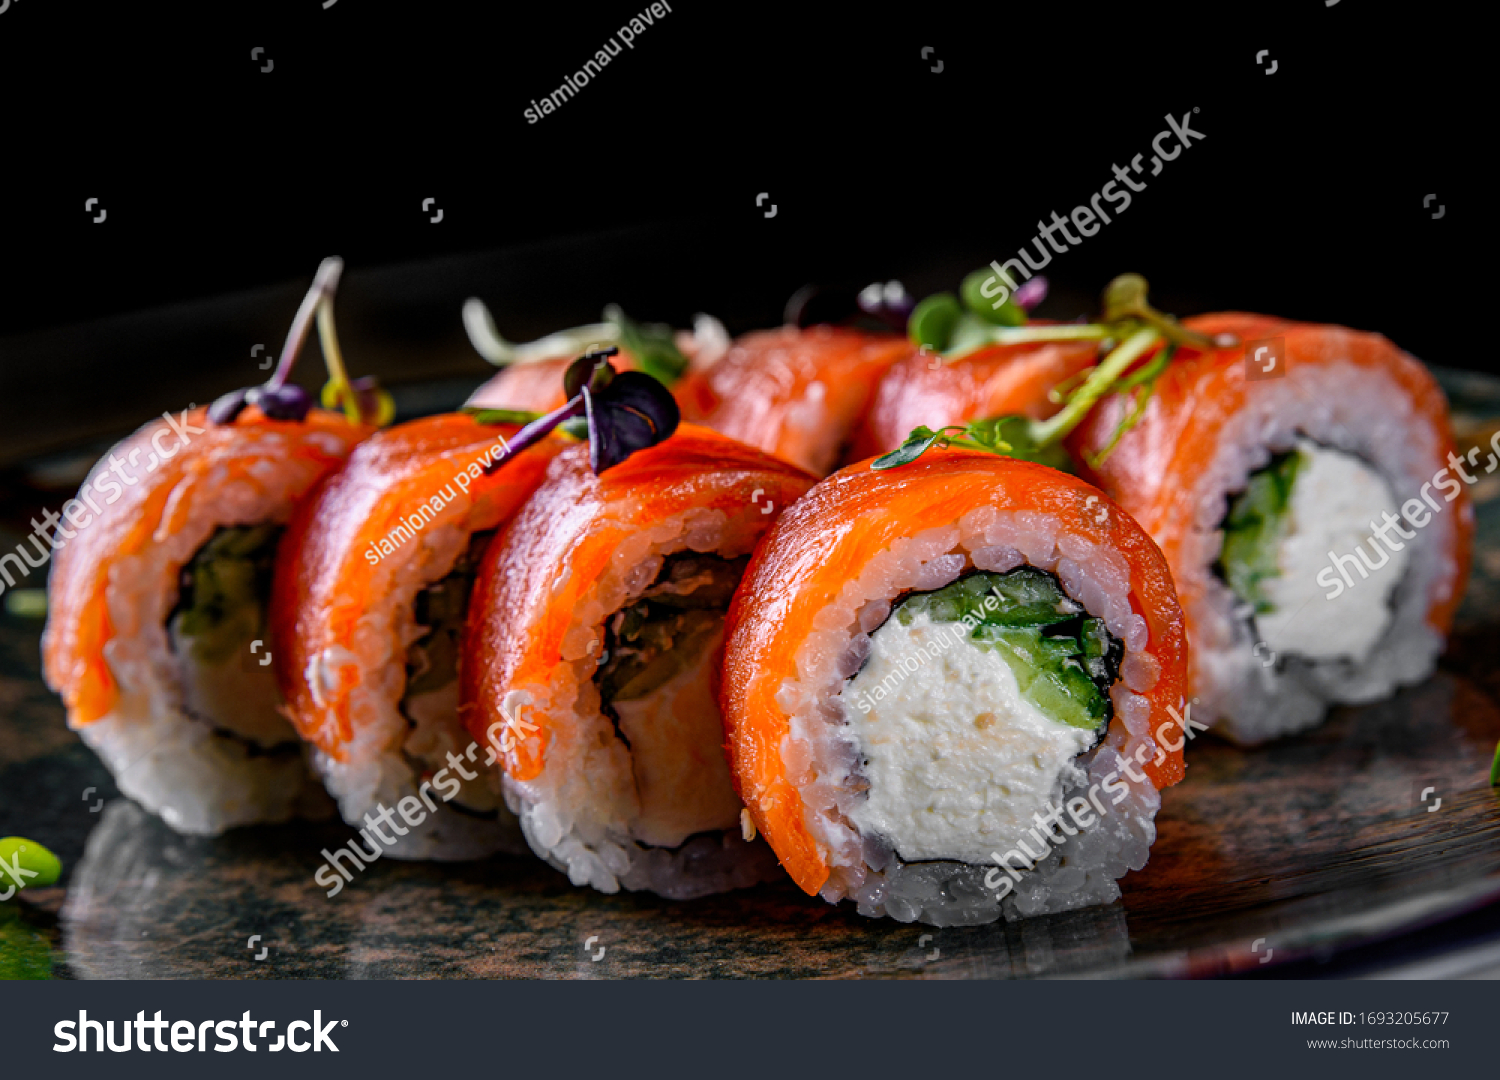 sushi roll with salmon, avocado, cream cheese in plate on black wooden table background #1693205677